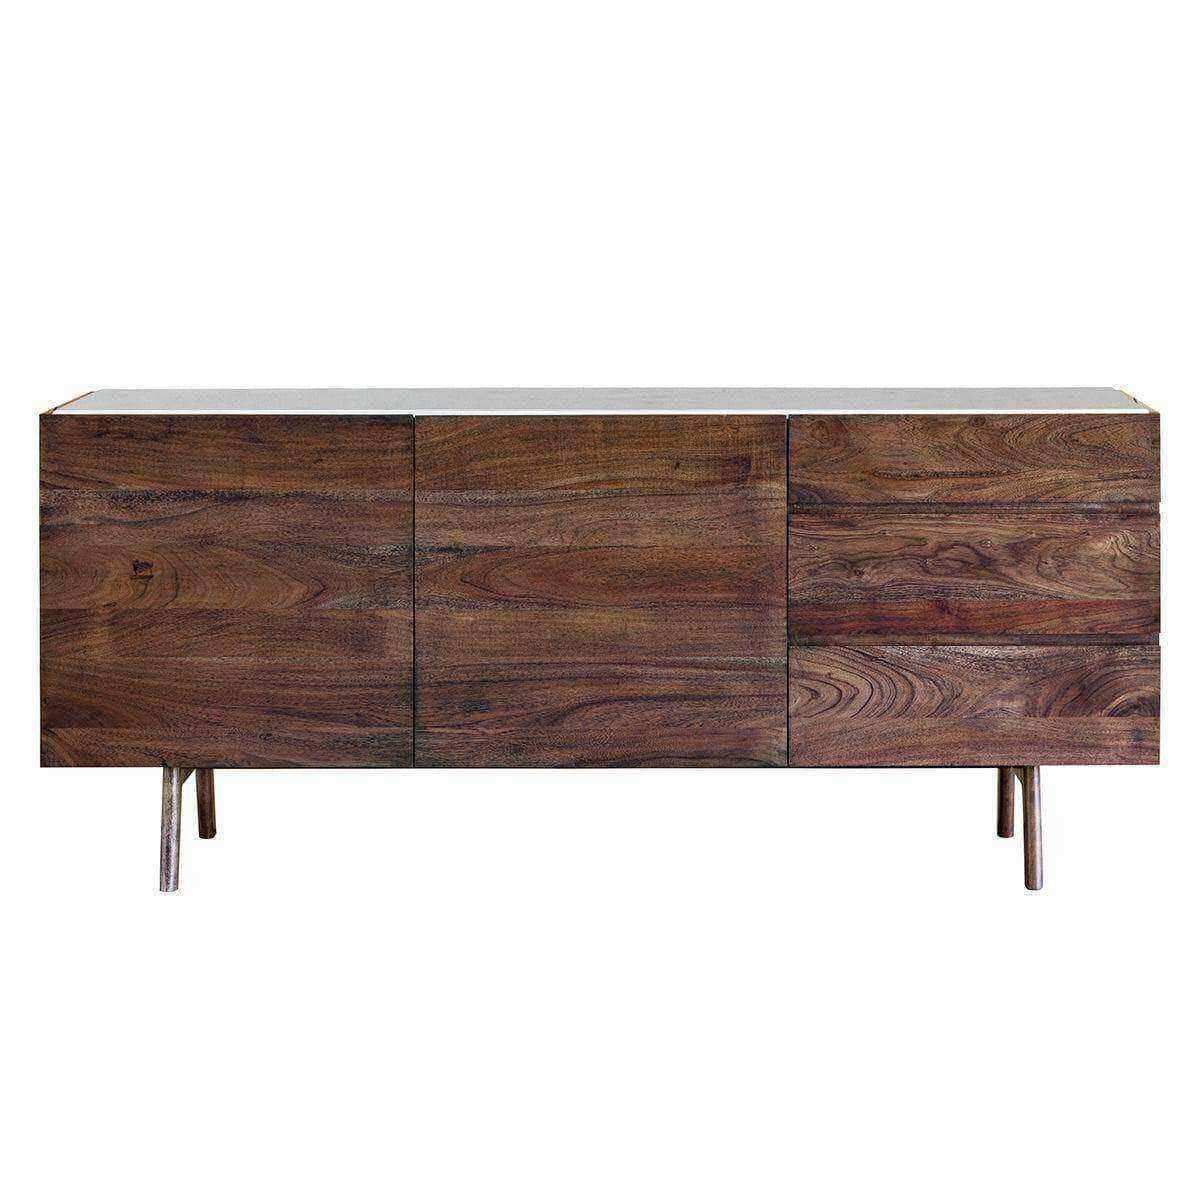 Inlaid White Marble Top Dark Wood Sideboard - The Farthing